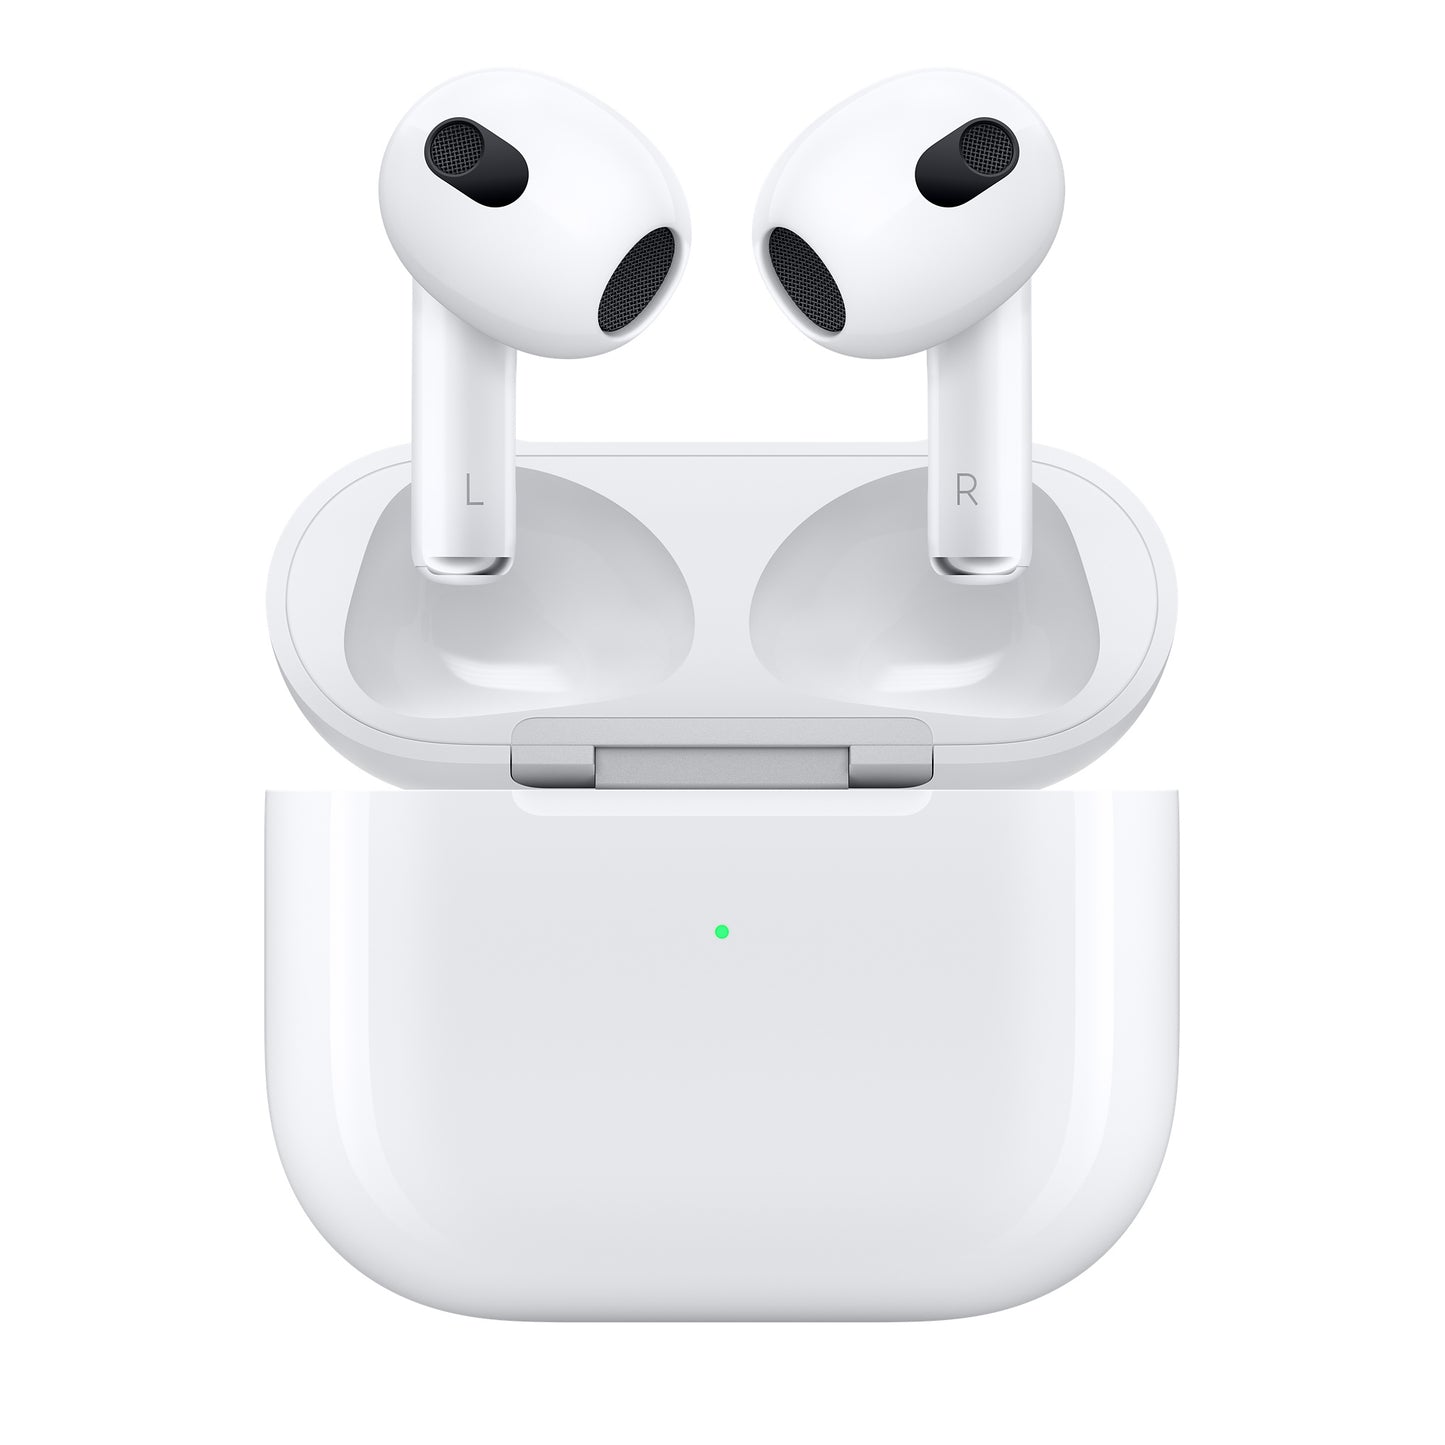 Open Box Apple AirPods In-Ear Truly Wireless Headphones (3rd Generation) with MagSafe ChargingCase